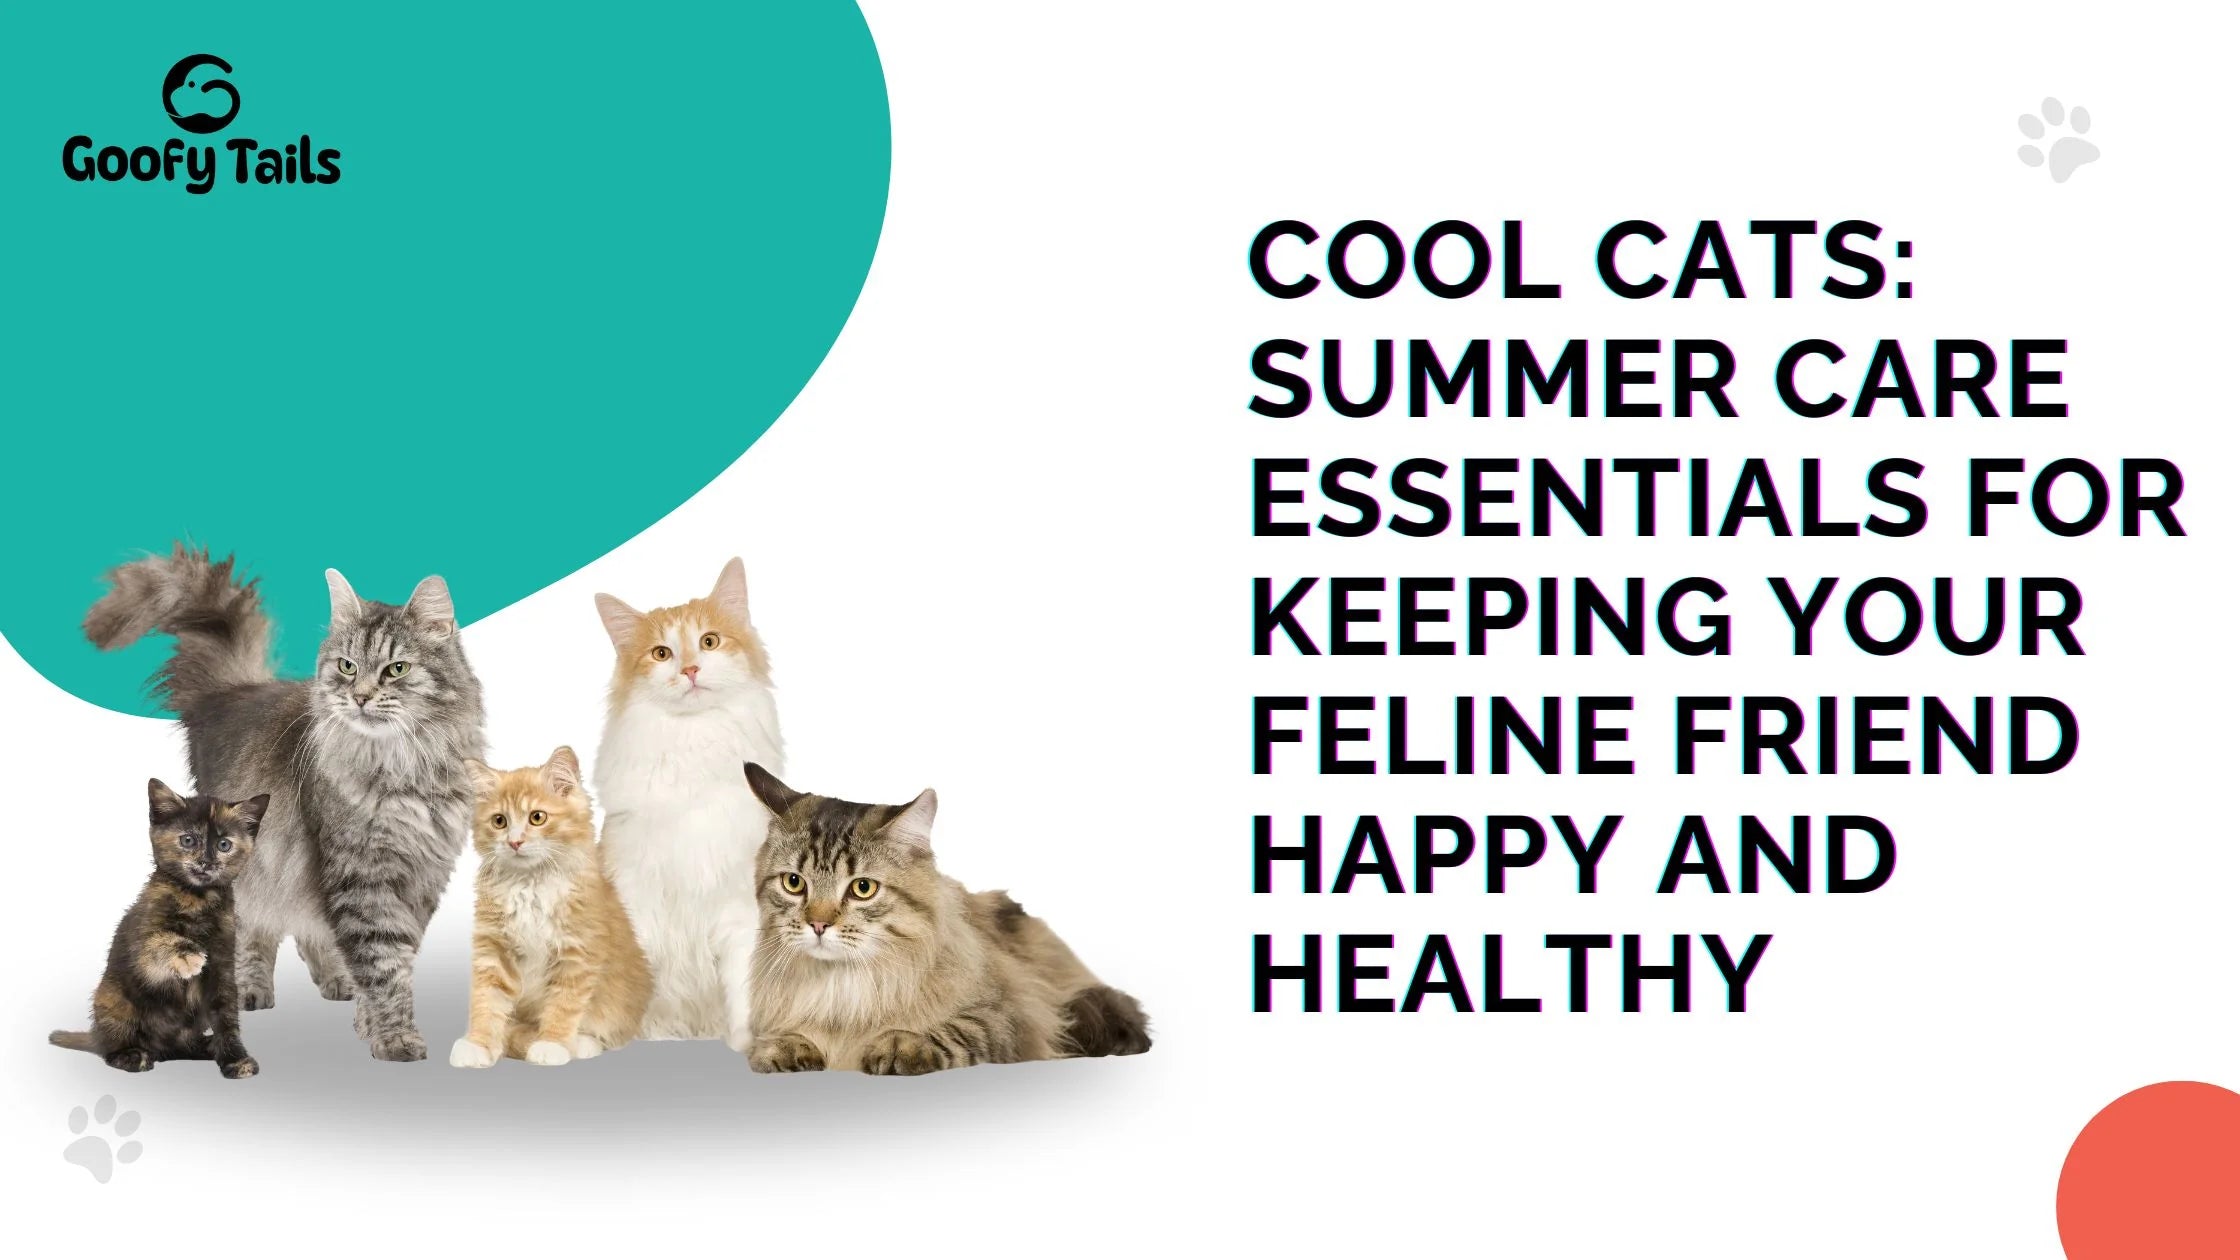 Cool Cats: Summer Care Essentials for Keeping Your Feline Friend Happy and Healthy